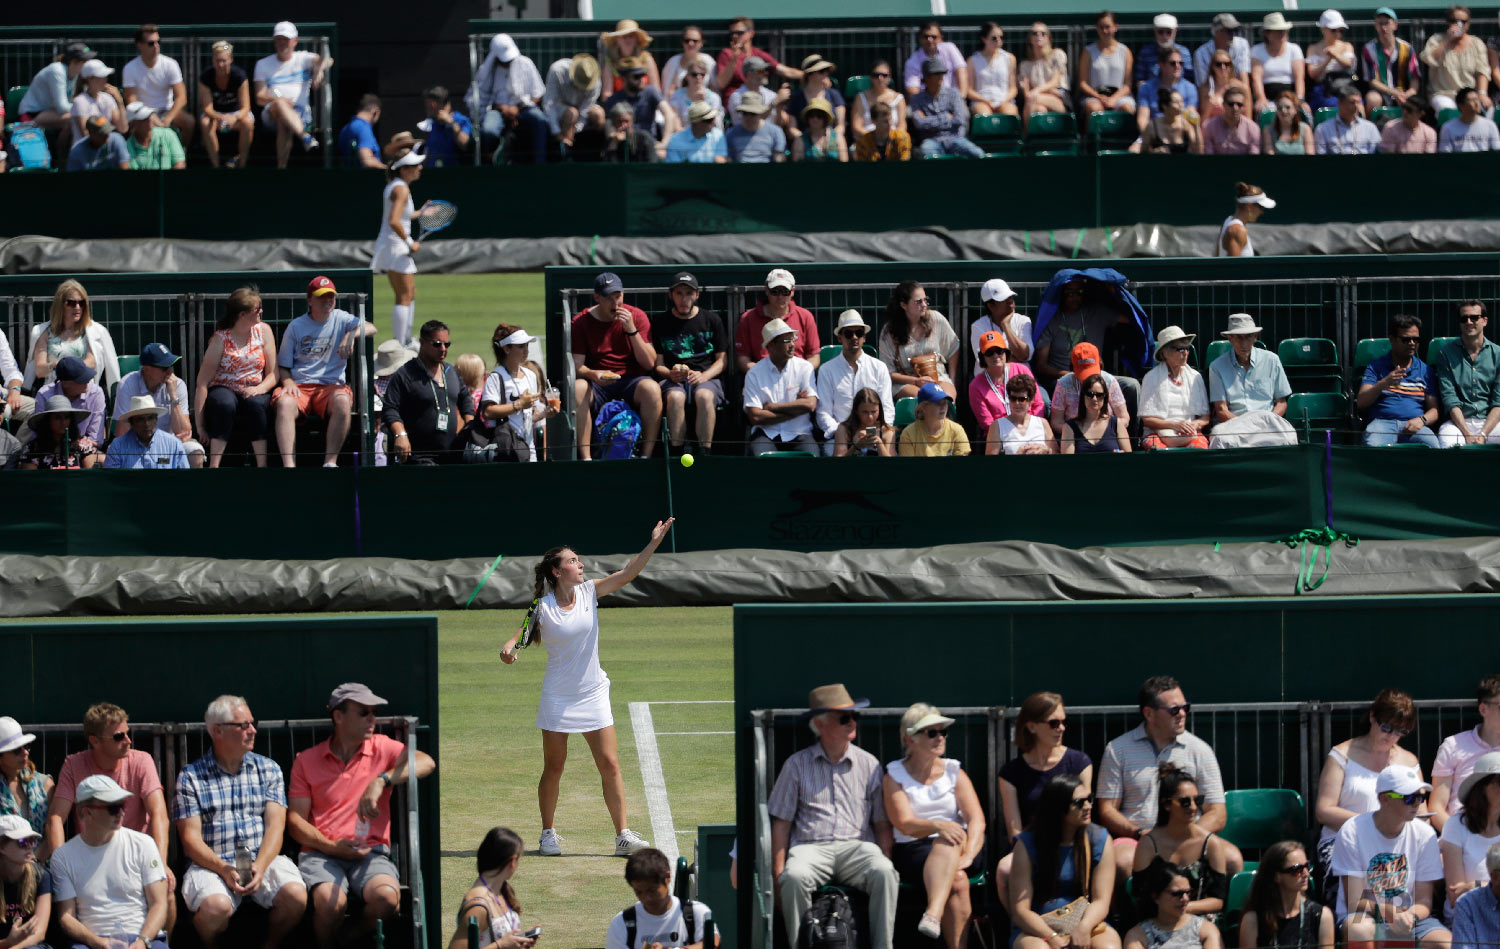  Eleonora Molinaro of Luxembourg serves to Natasha Subhash of the US during their girls' singles match on the sixth day at the Wimbledon Tennis Championships in London on July 7, 2018. (AP Photo/Ben Curtis) 